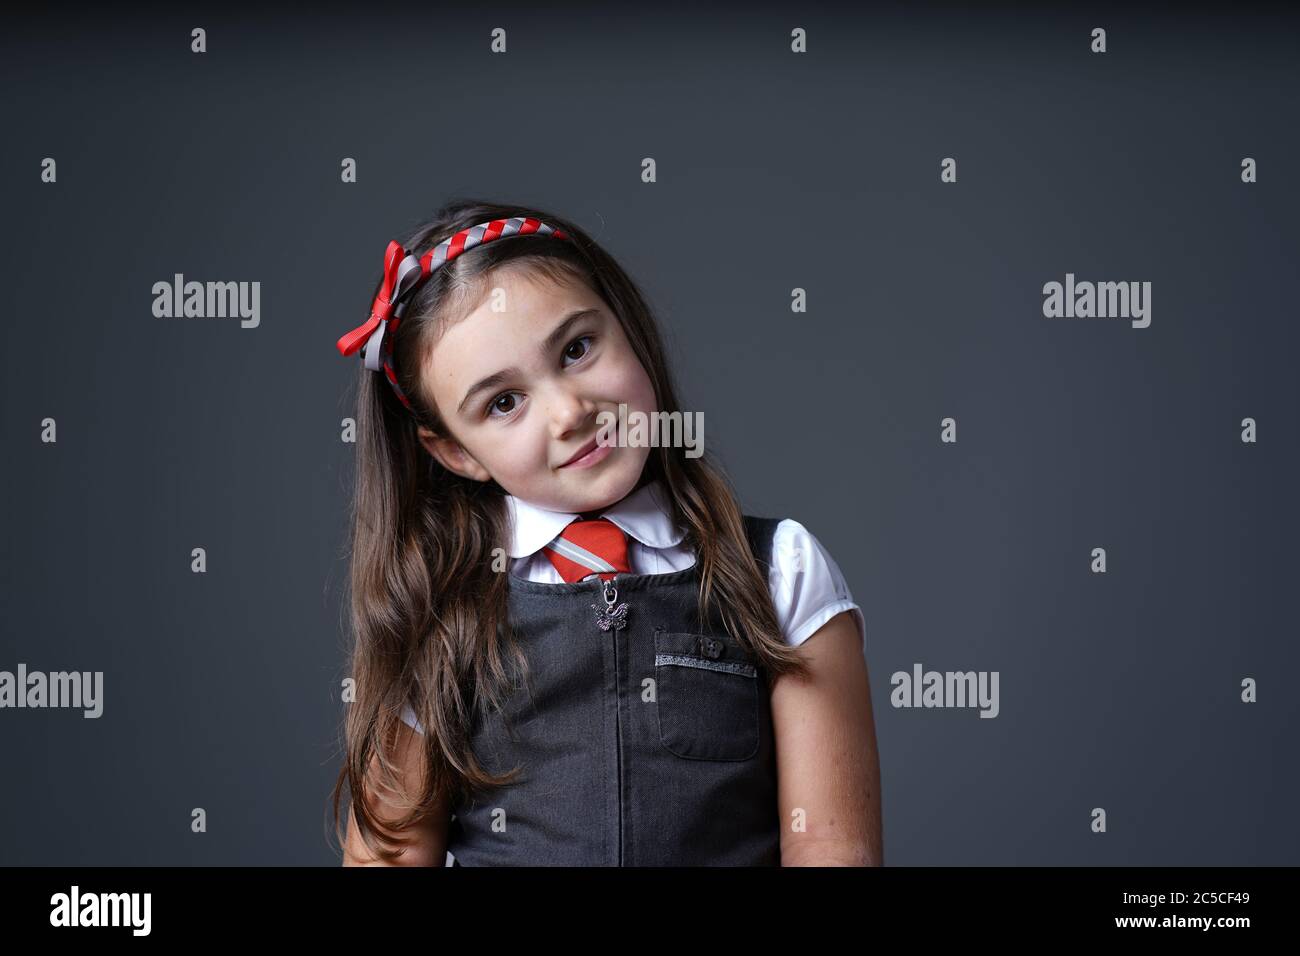 primary school elementary girl child wearing school uniform with grey and red colours color Stock Photo